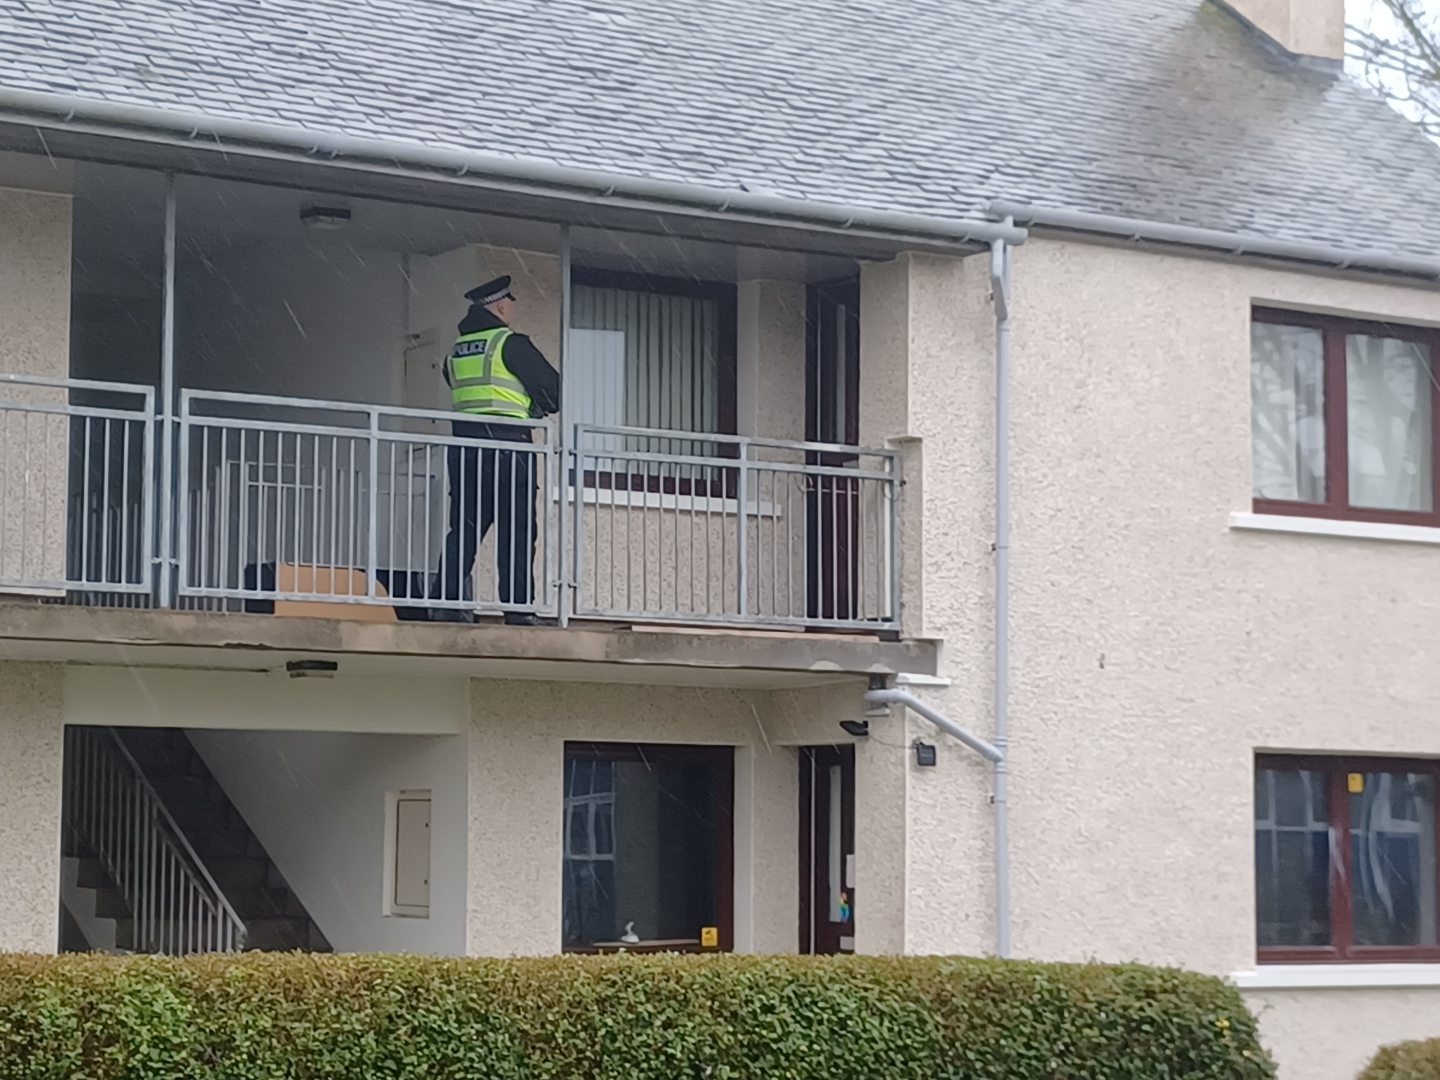 Police at Glenogil Drive, Arbroath, the day after an alleged double stabbing. 